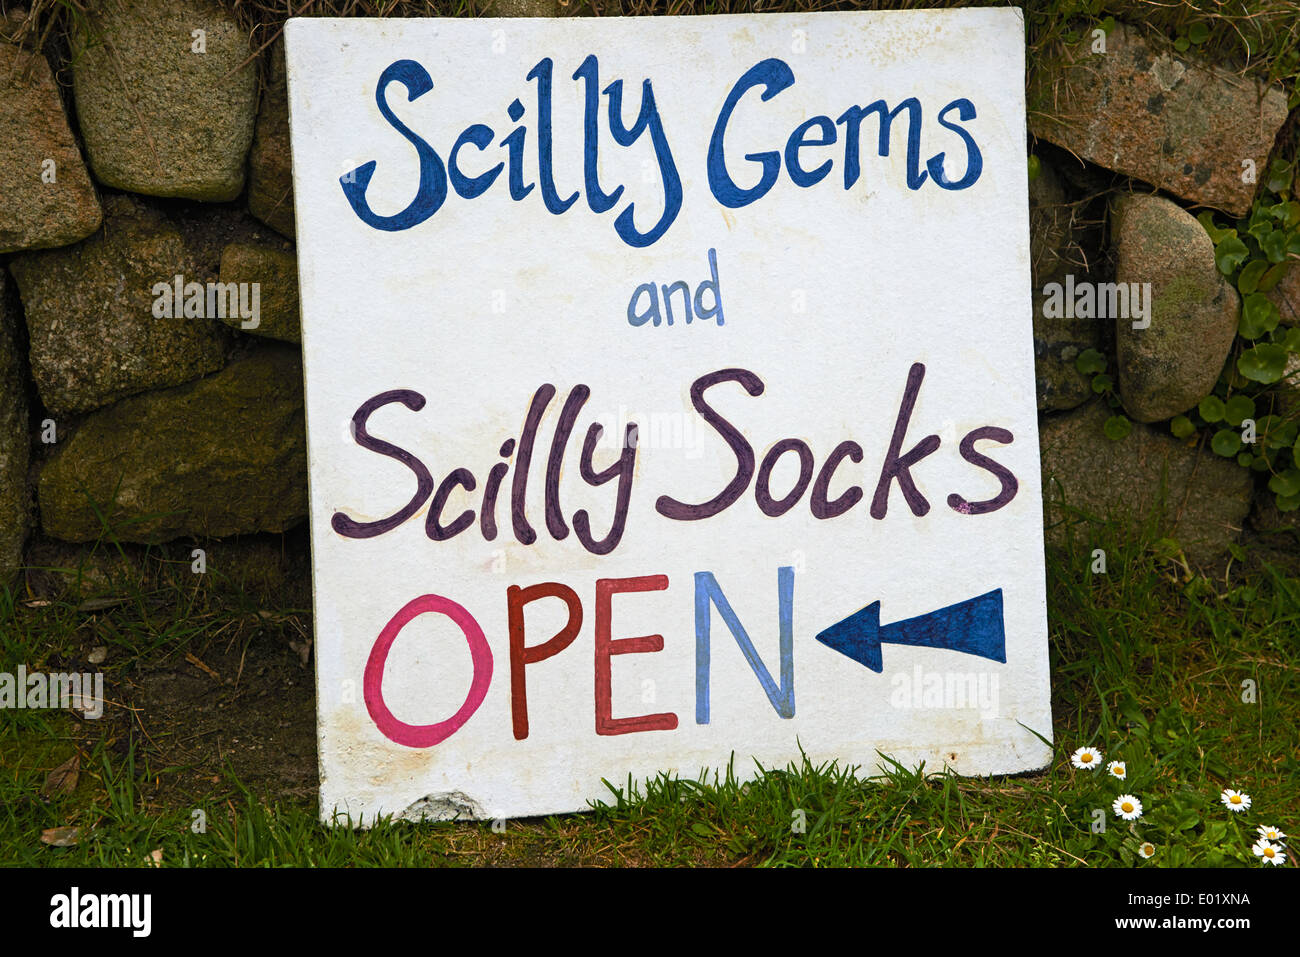 Signe pour Scilly gems et Scilly chaussettes à Porthloo Porthloo, studios, St Mary, Îles Scilly, Scillies, Cornwall Banque D'Images